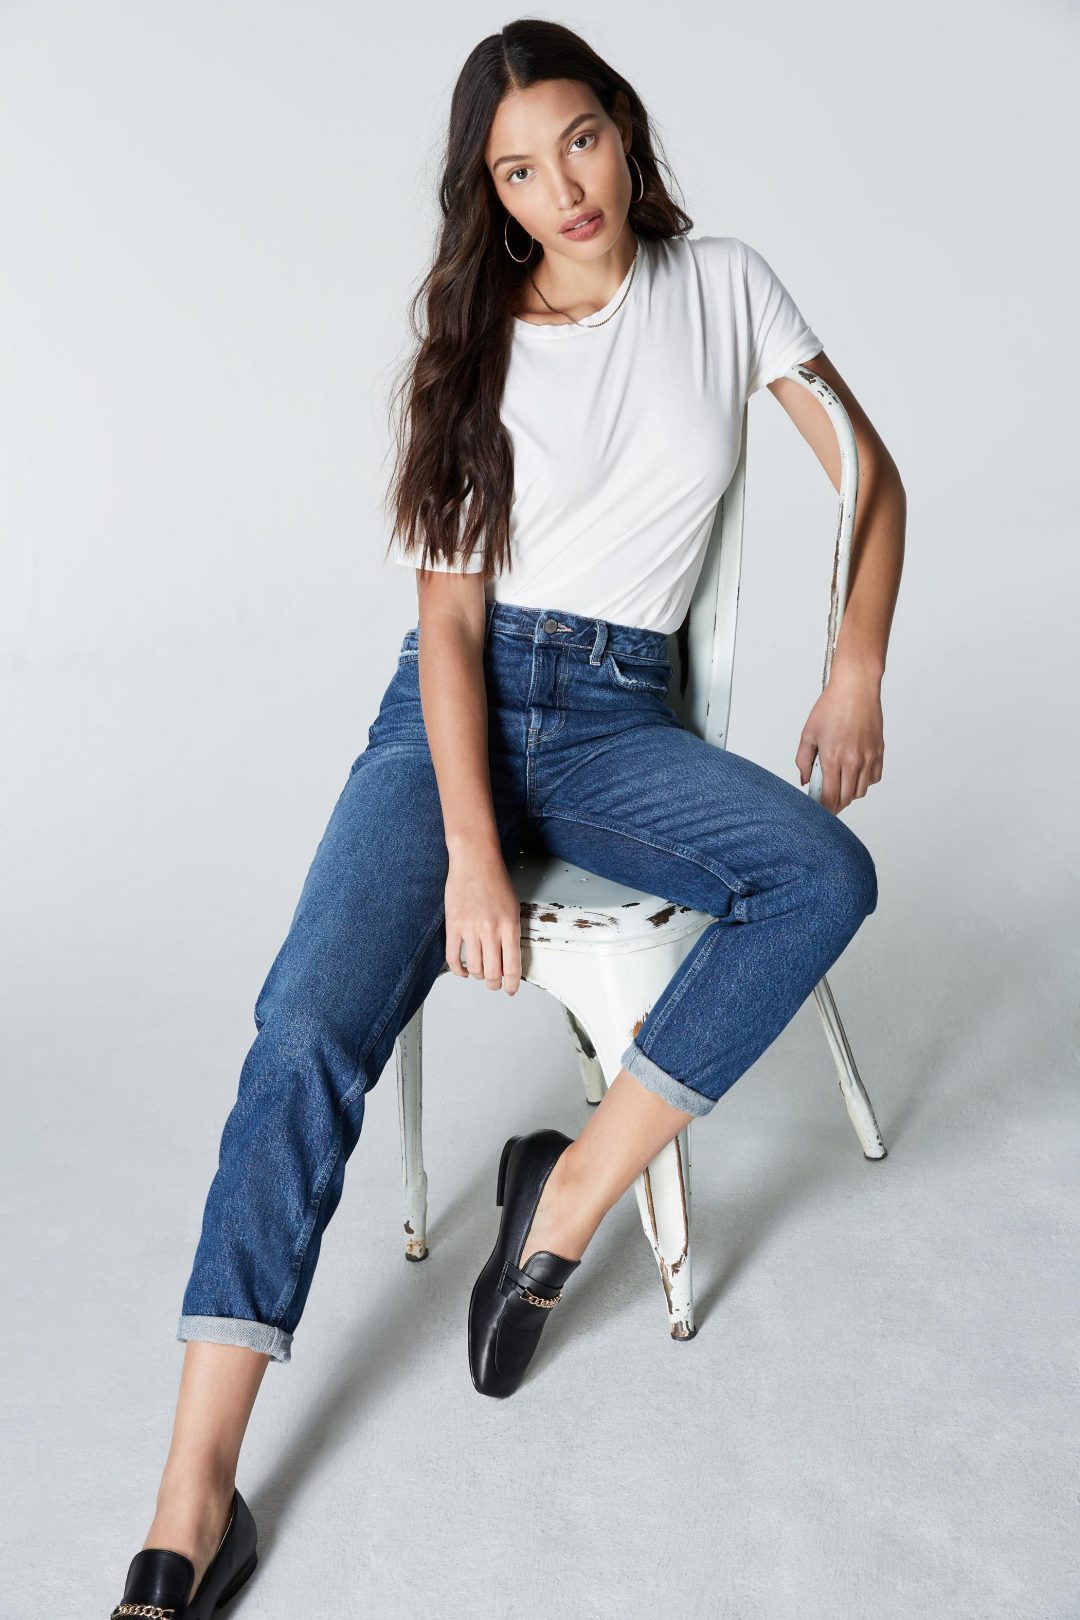 jeans and white tee